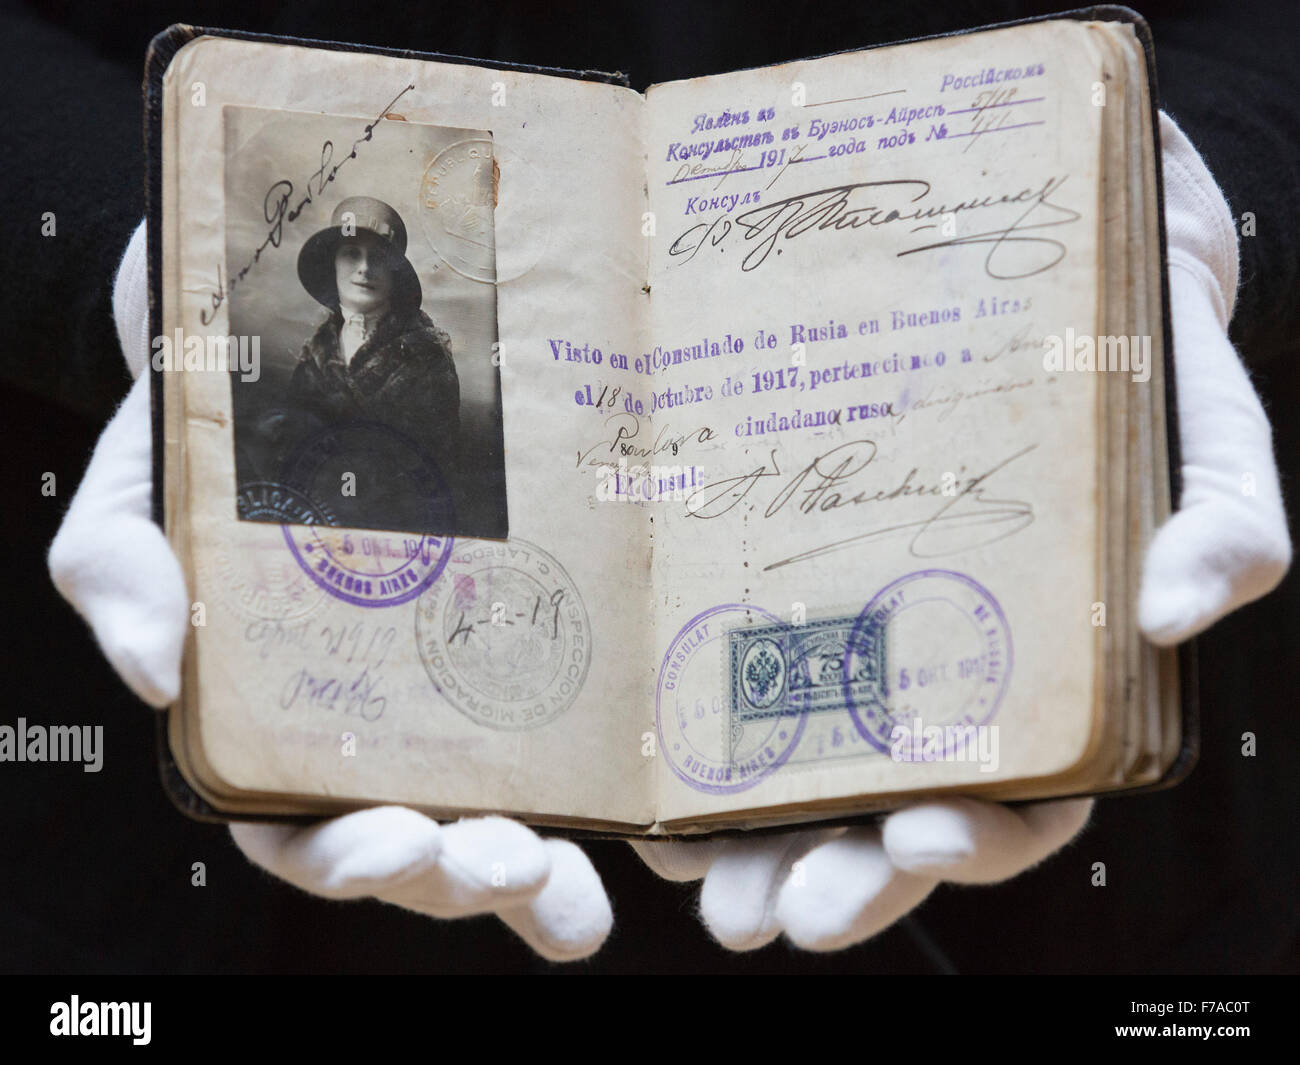 London, UK. 27 November 2015. A Christie's employee presents Anna Pavlova's passport, estimate GBP 8,000-12,000. Christie's London announce a series of sales devoted to Russian culture and art. The Russian Art sale takes place on 30 November and the Valuable Book and Manuscript sale on 1 December. Stock Photo